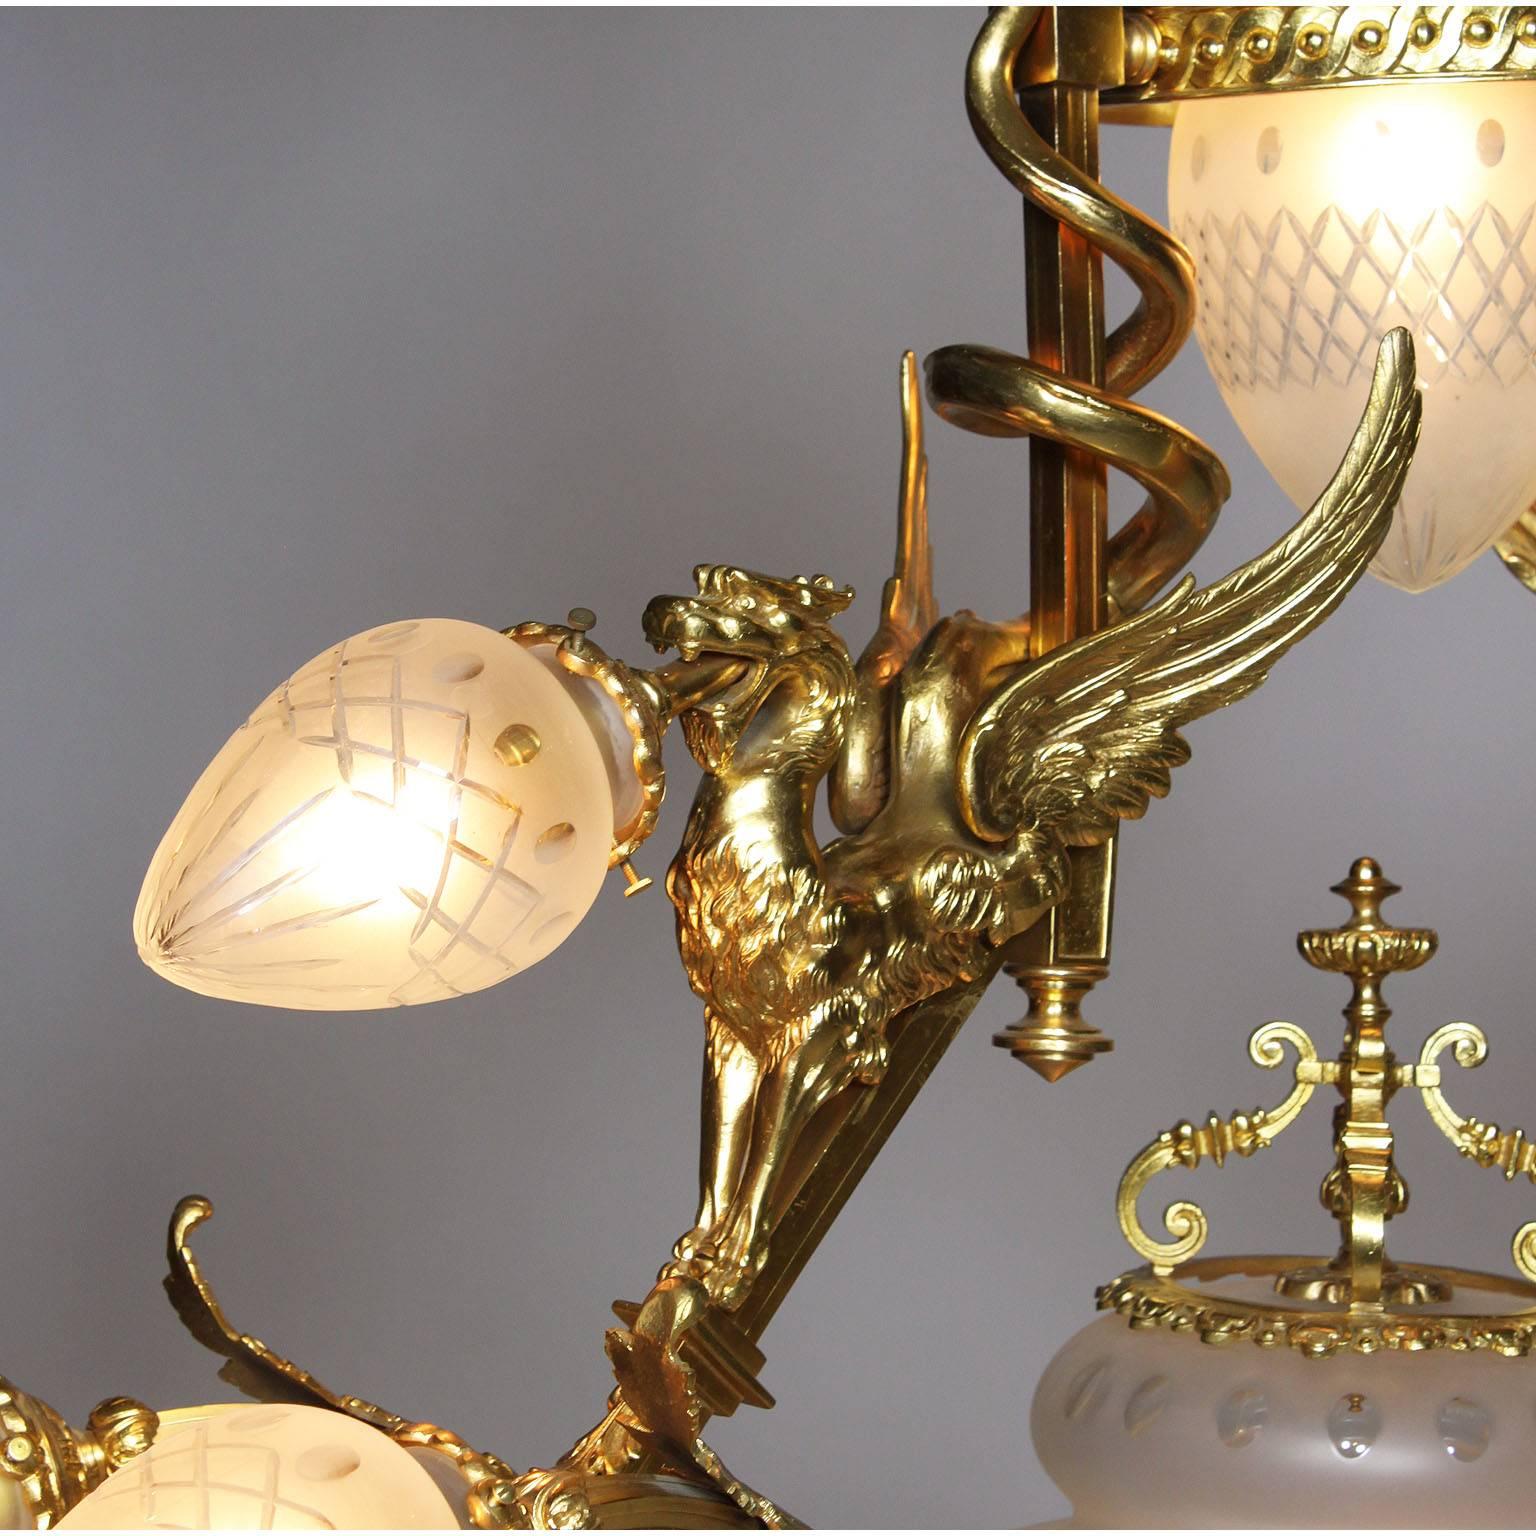 French Belle Epoque 19th-20th Century Neoclassical Style Gilt-Bronze Chandelier For Sale 3